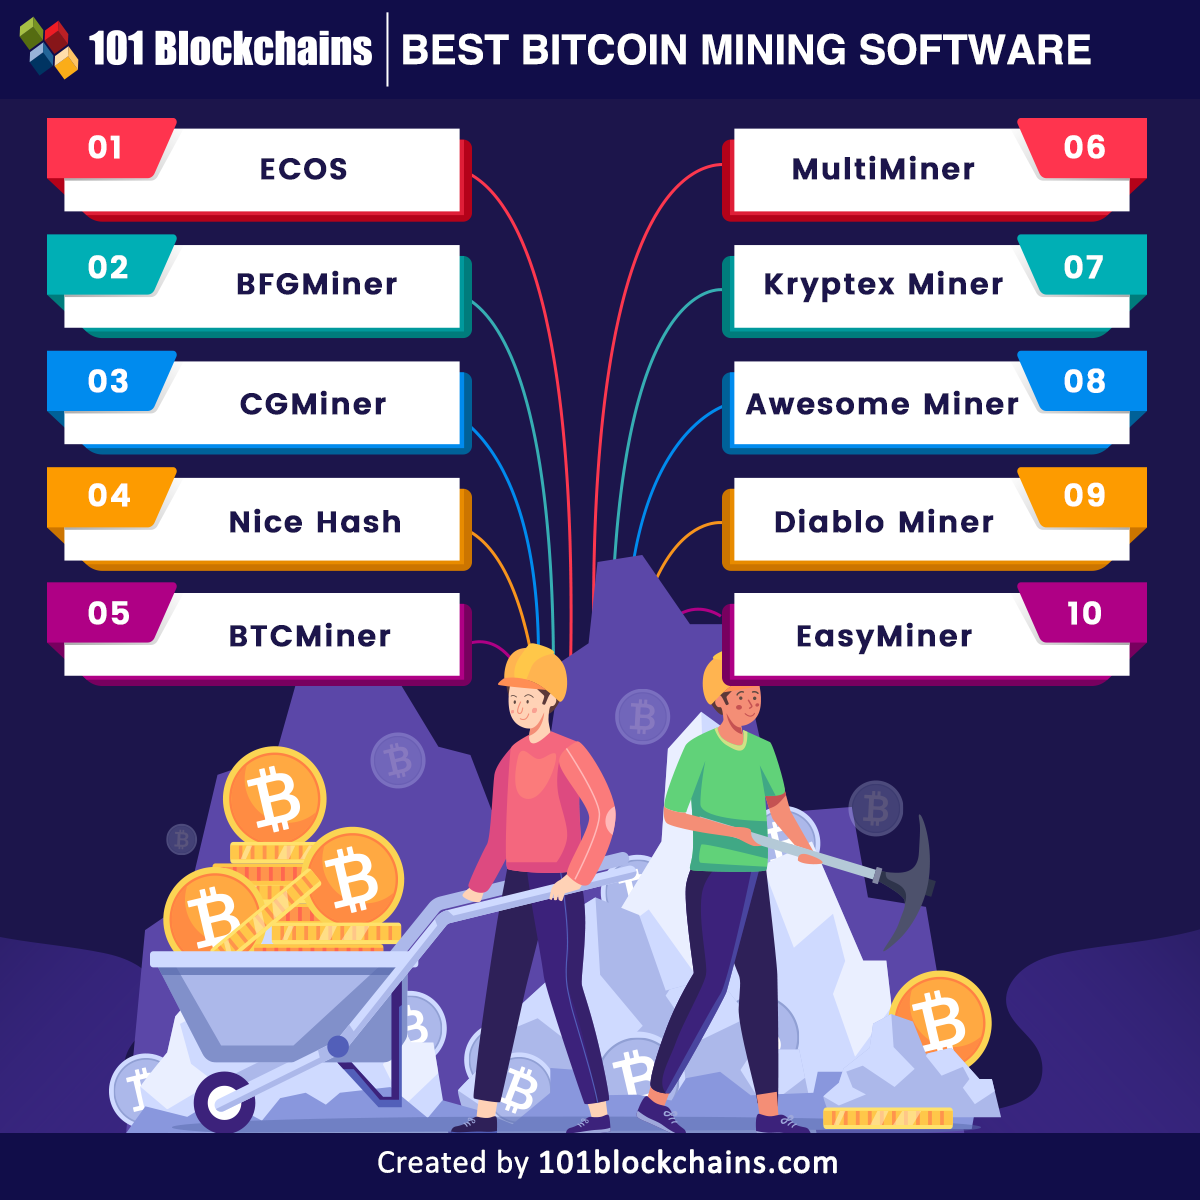 Mining software supported by Awesome Miner